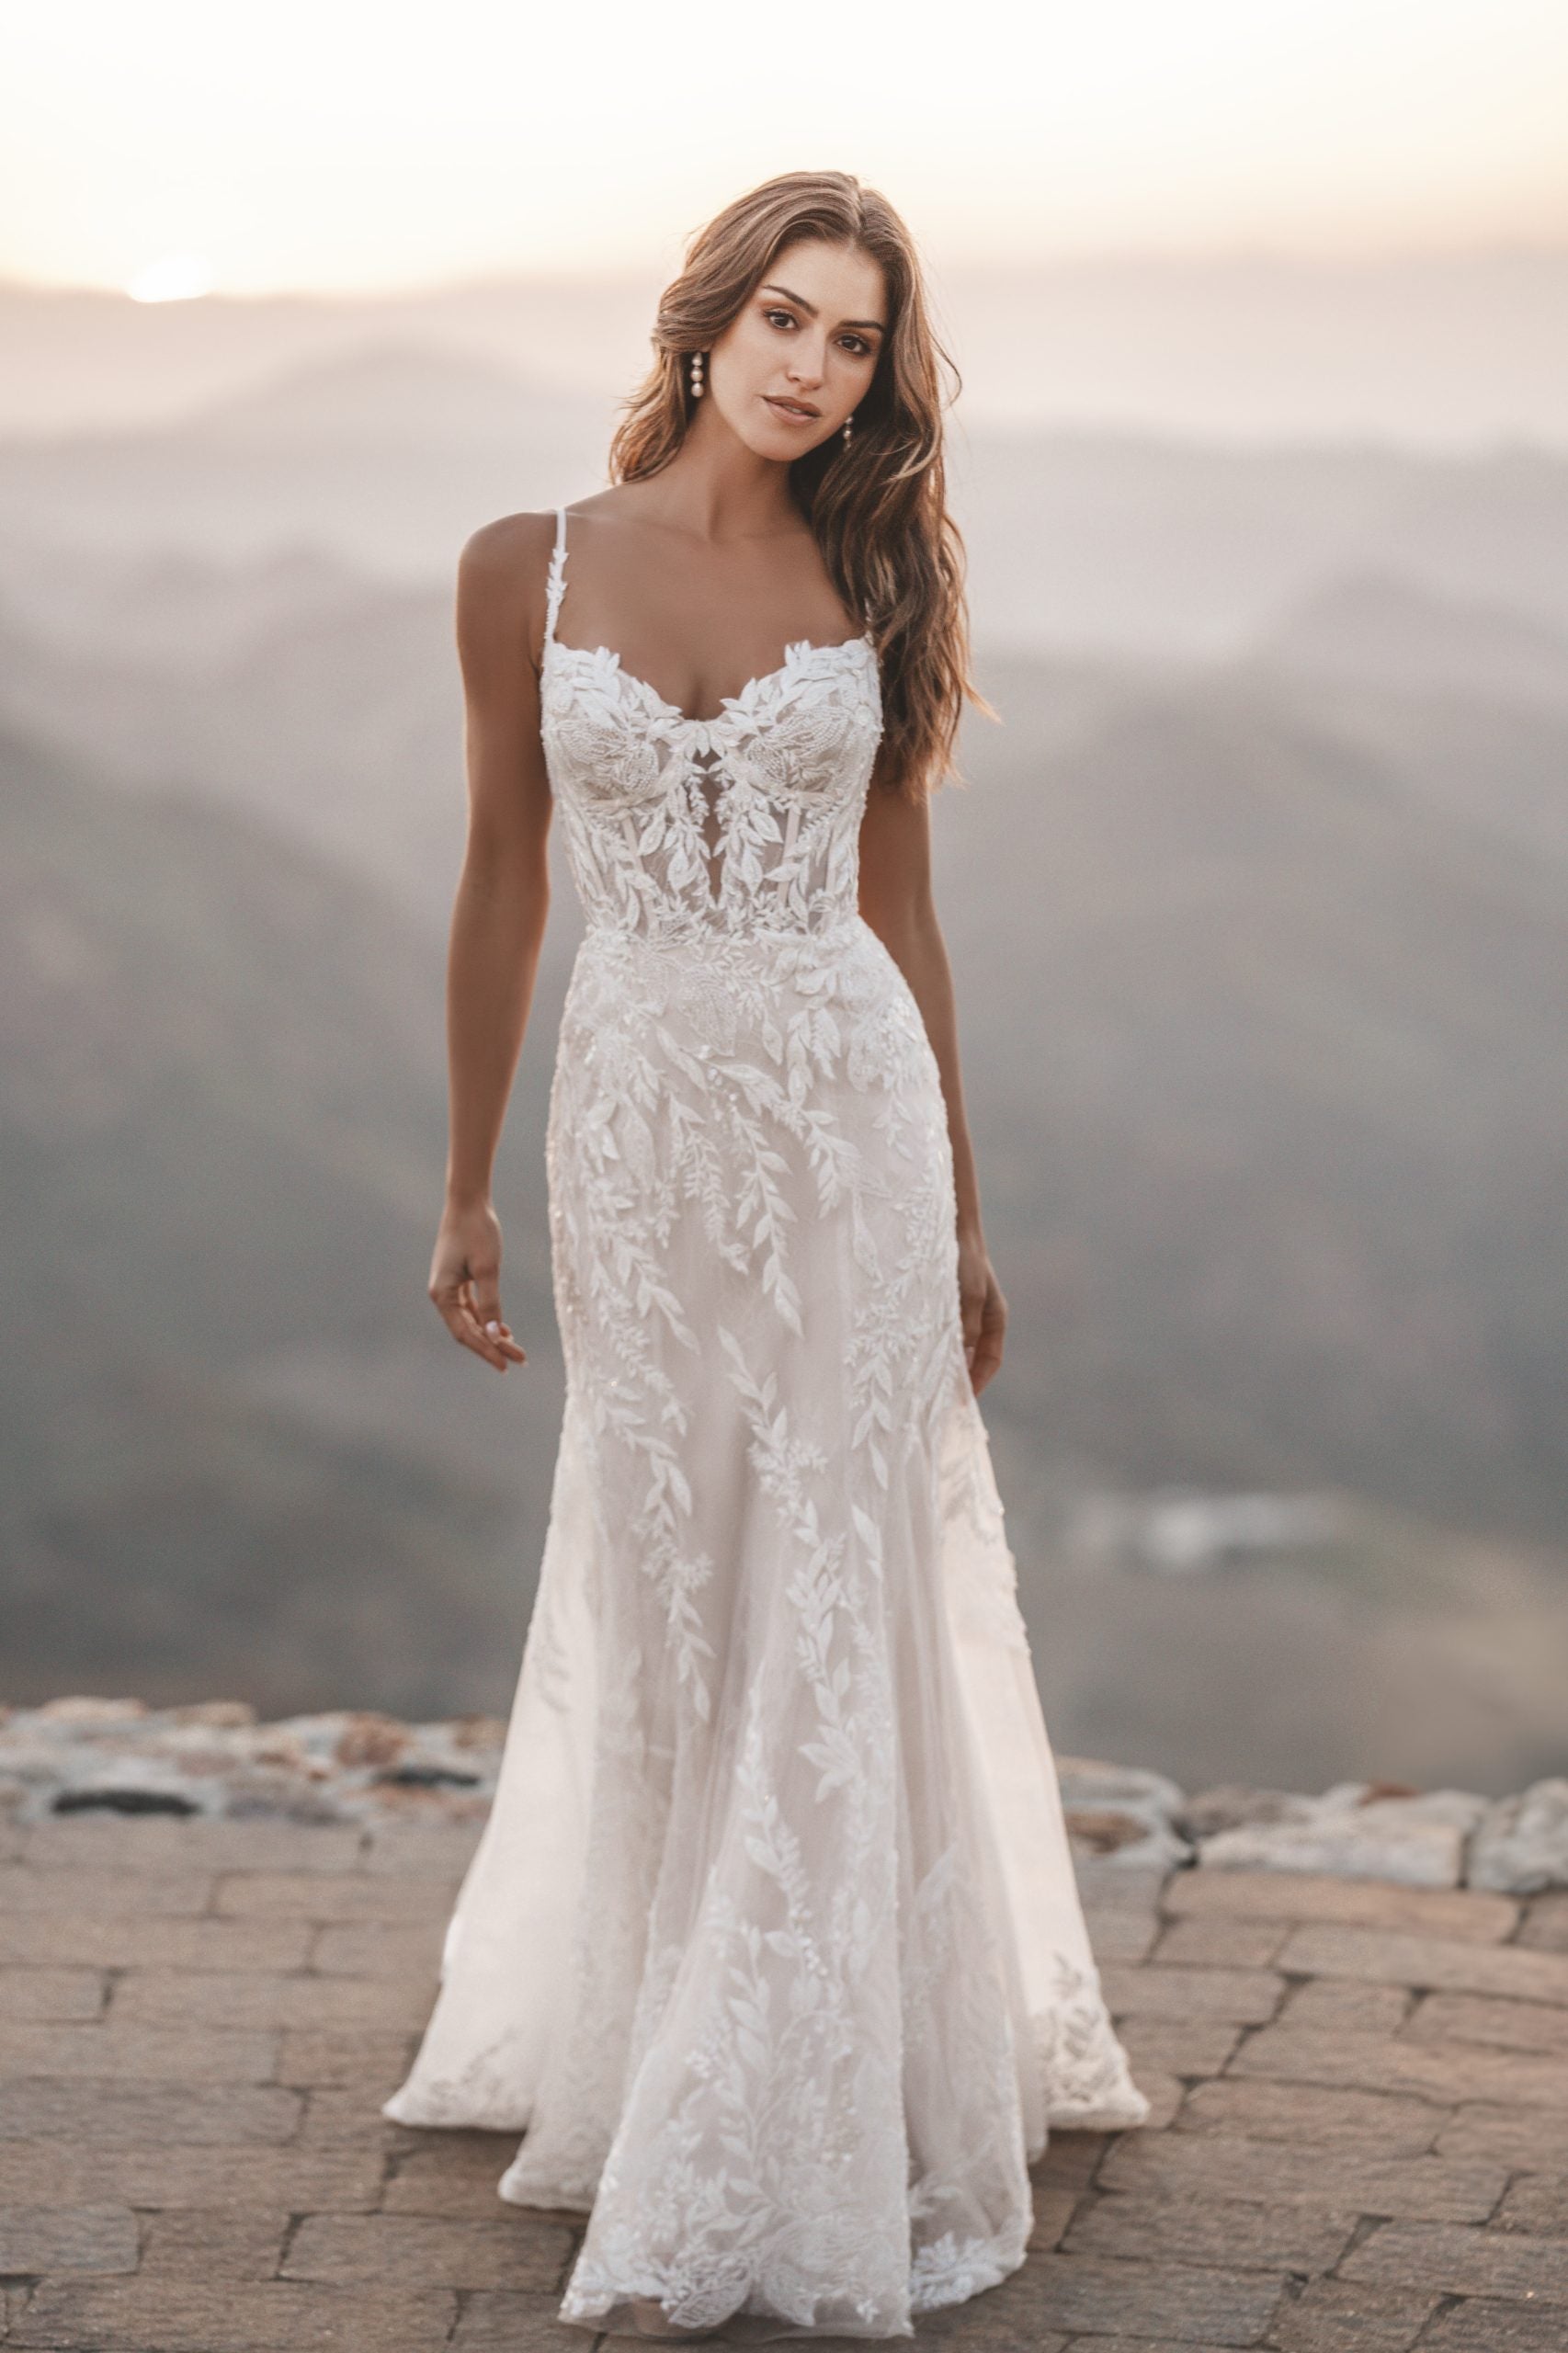 Romantic Fit-and-Flare Gown With Low Back by Allure Bridals - Image 1